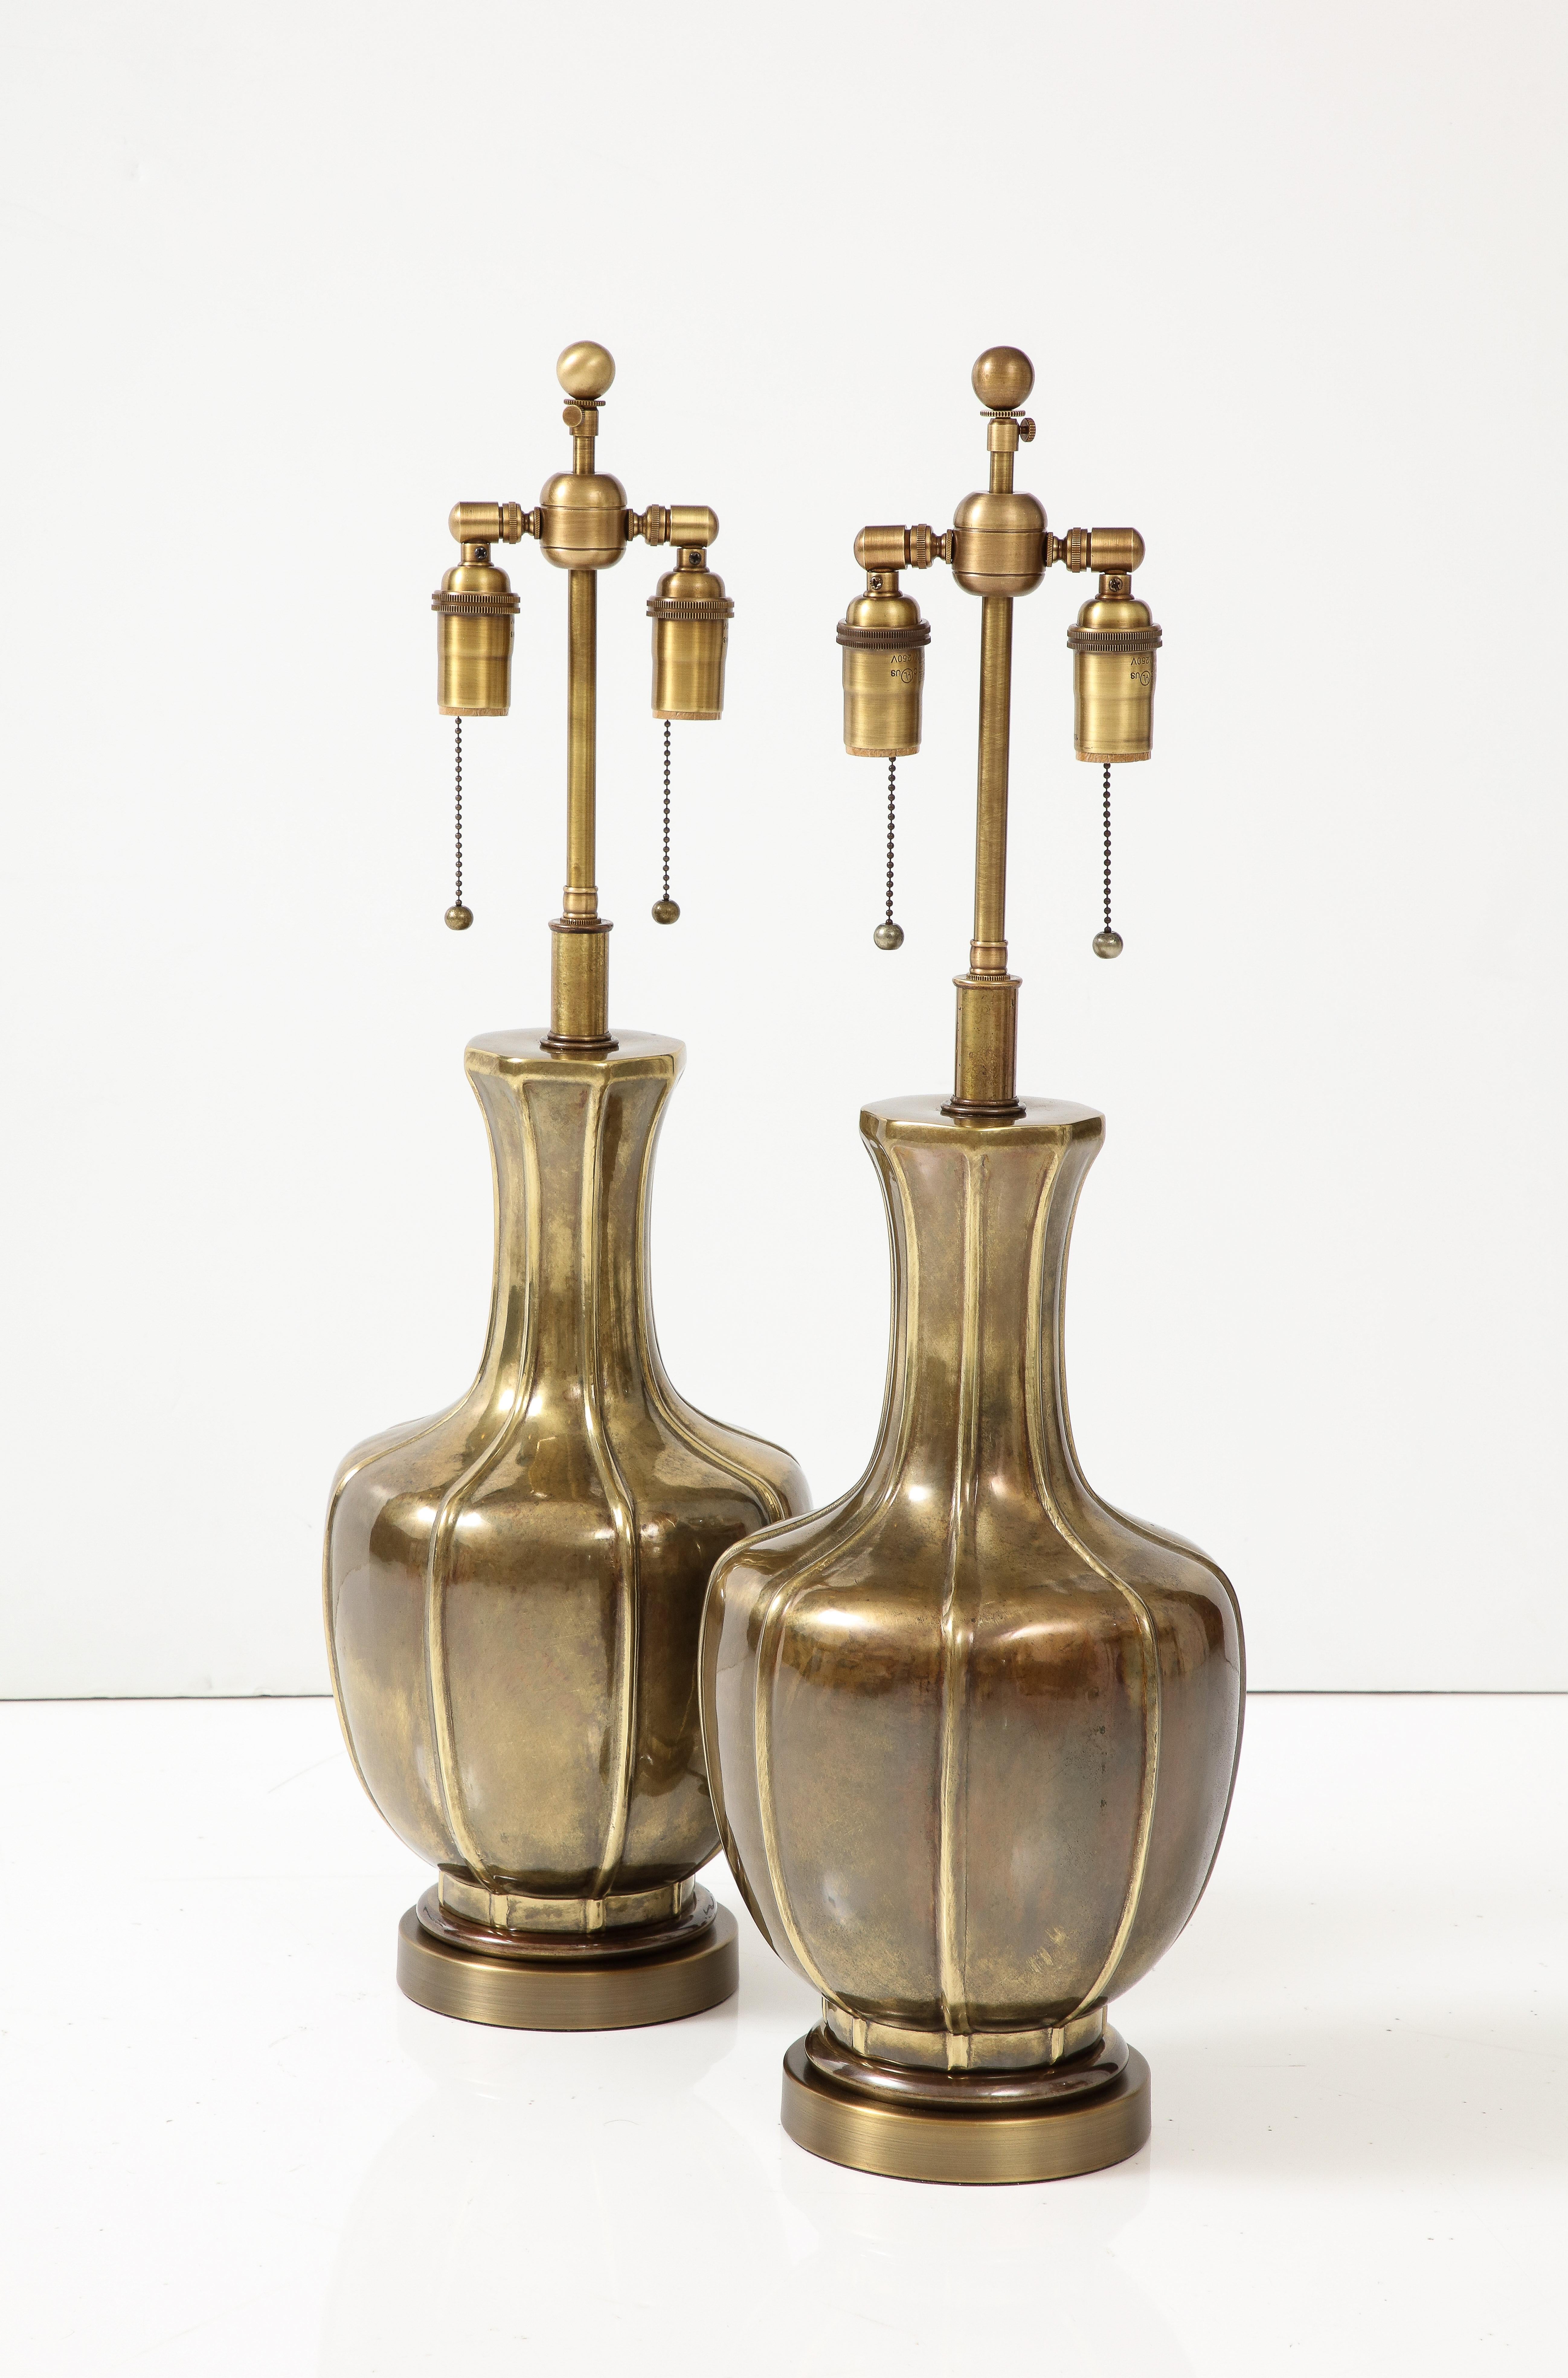 Pair of 1960s Lamps with an Arts and Crafts influence by Frederick Cooper.
The Lamps have a wonderful aged Brass finish and they have been Newly rewired with 
adjustable antique brass double clusters that take standard Size light bulbs.
Each